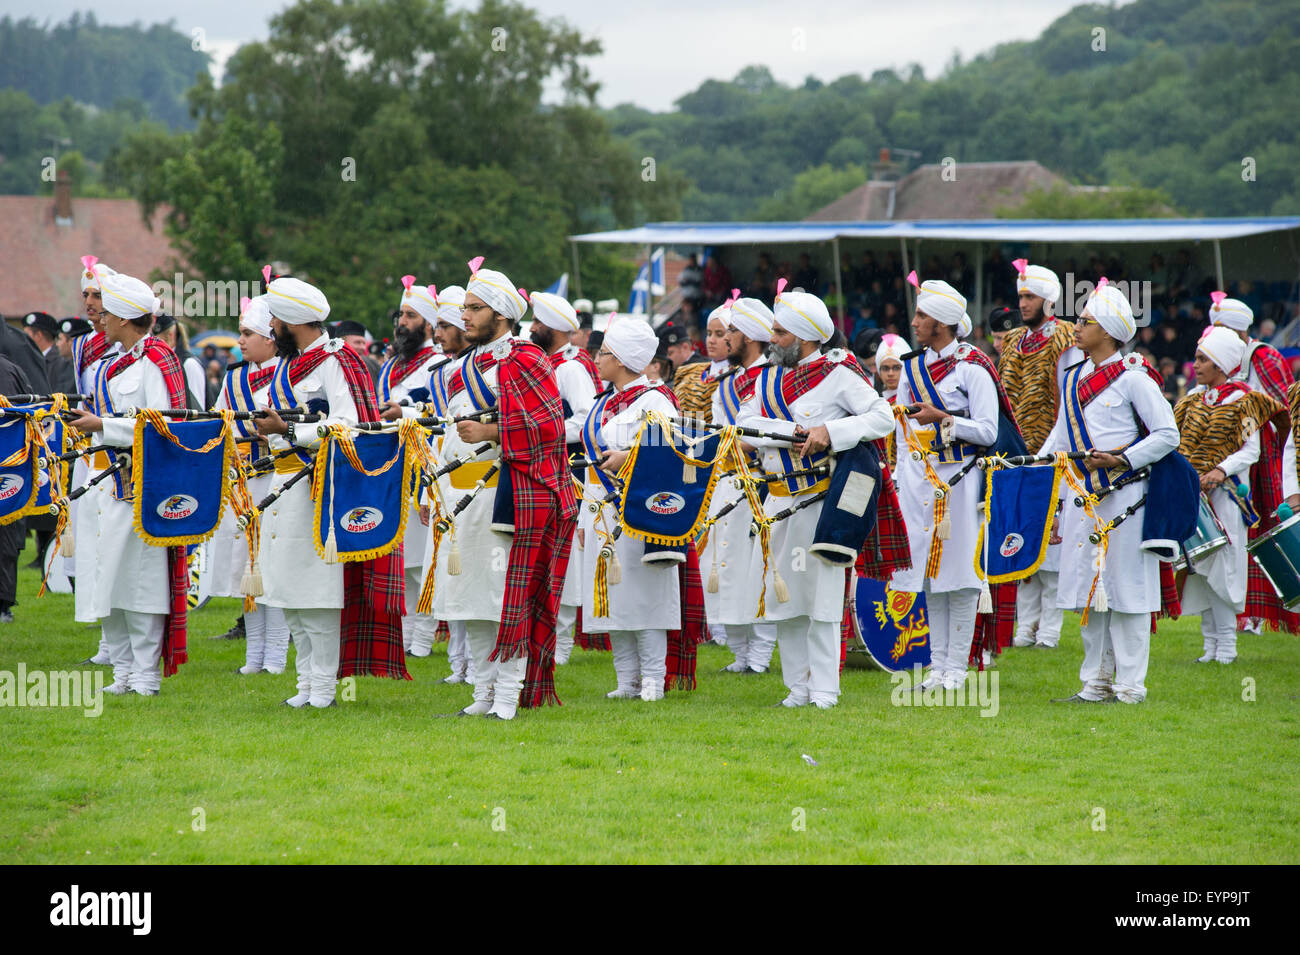 Bridge of Allan, Scotland, 2nd of August 2015. Bridge of Allan Highland Games 2015. Pipe bands, sporting and traditional Scottish competition events held in Bridge of Allan Highland near Stirling. The event is near the Ochil hills and has views of the Wallace Monument and the Stirling Castle. The Sri Dasmesh Malaysian Sikh Pipe band on the massed bands ready for prize giving. Credit:  Andrew Steven Graham/Alamy Live News Stock Photo